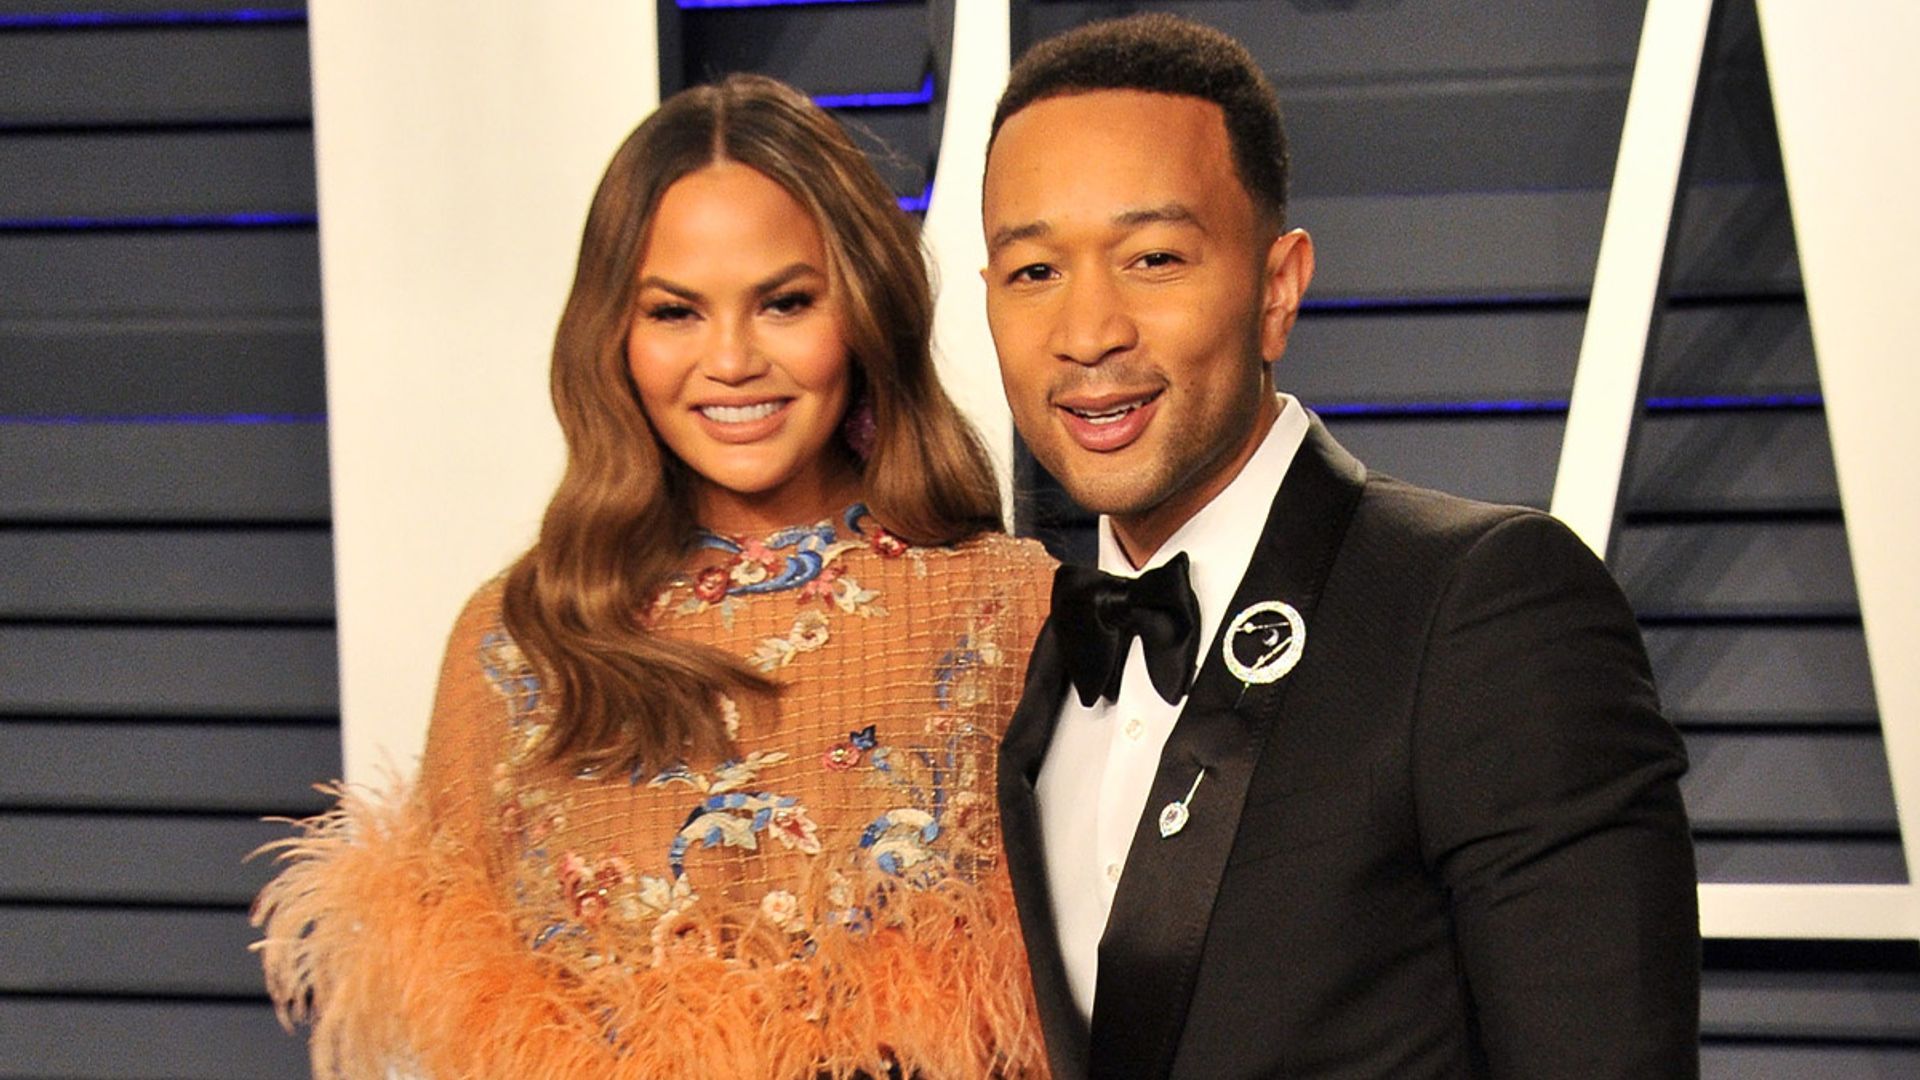 Chrissy Teigen and John Legend celebrate Grammys win at luxury home – and all fans notice this